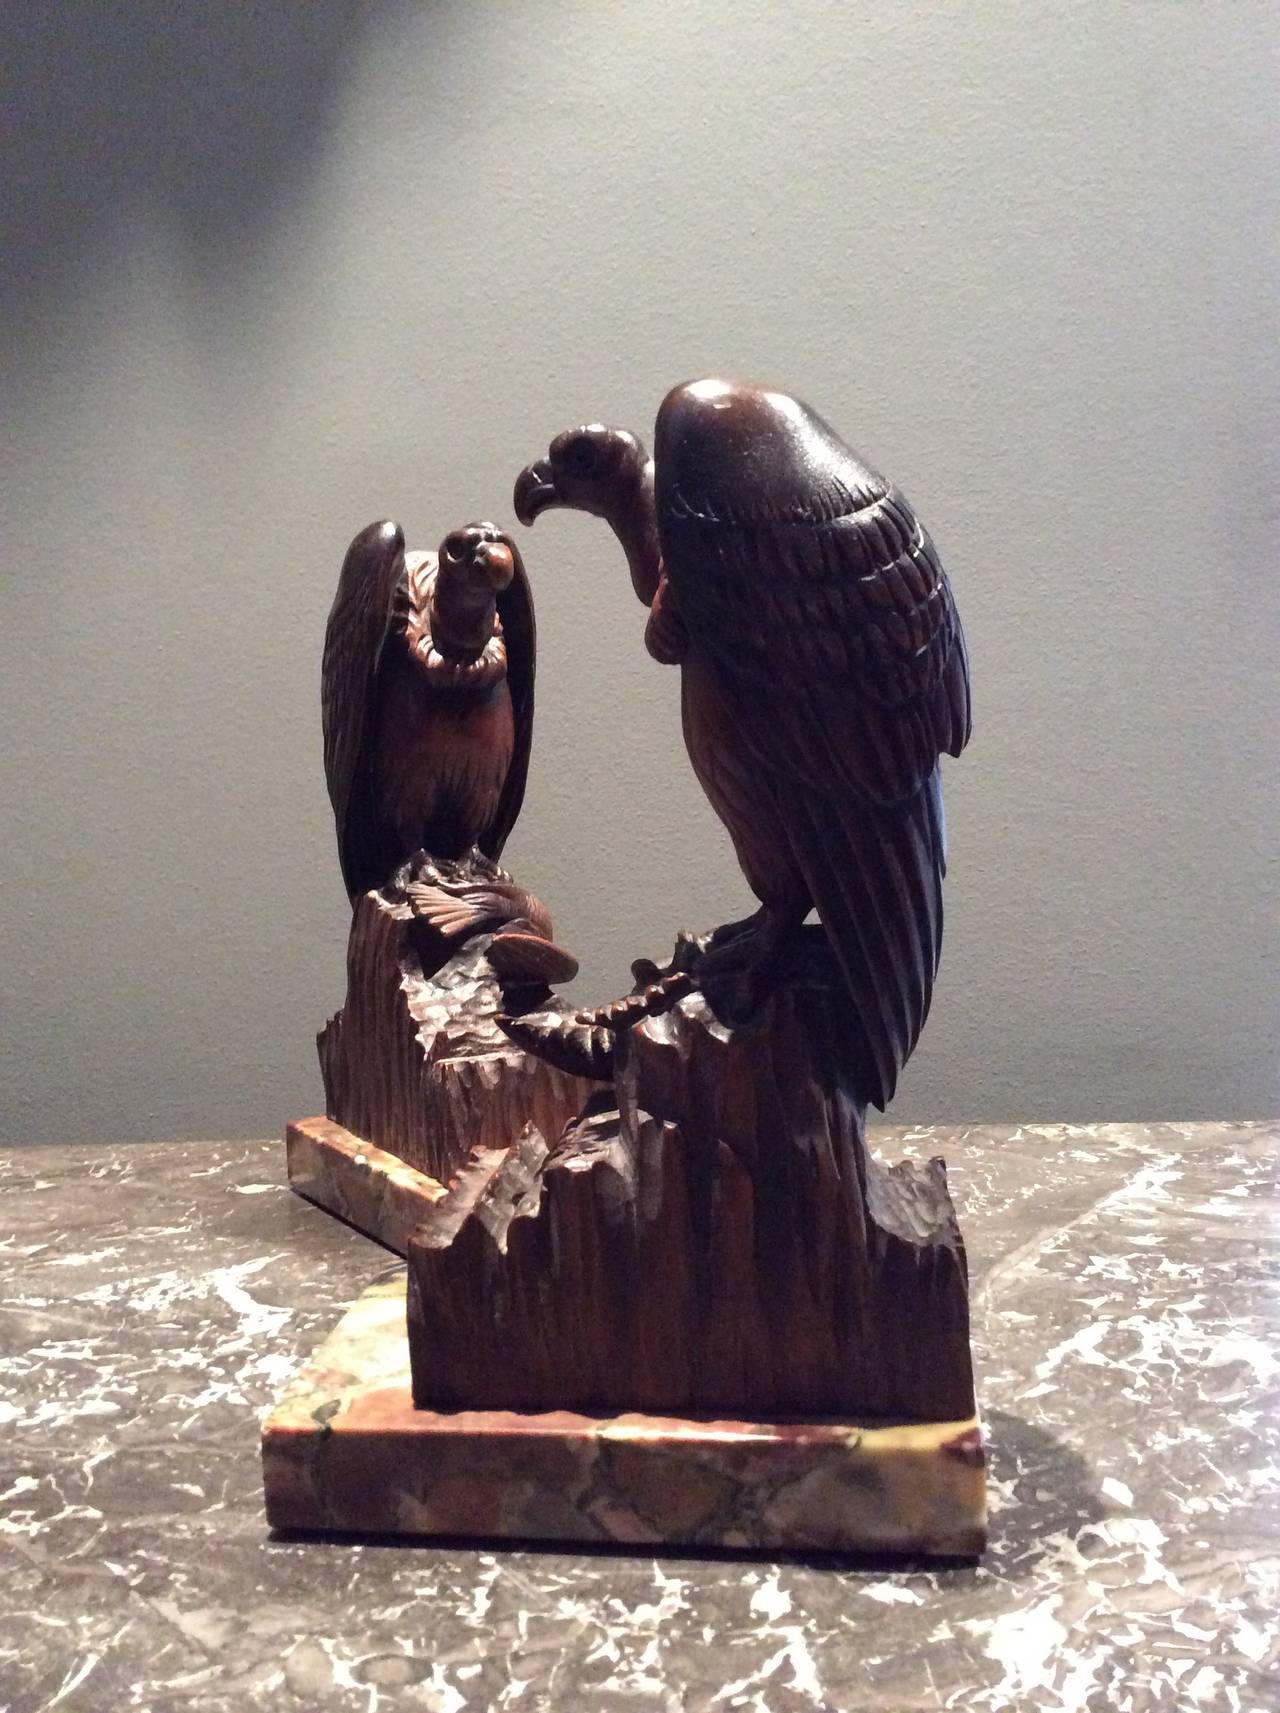 Exceptional pair of intricately carved wooden sculptures representing a hawk sitting on a rock holding in its claws a prey.
1930 Art Deco era bears a signature. J. Betola.
Directly inspired by the sculptures of Paul Jouve. Notice to lovers of Art